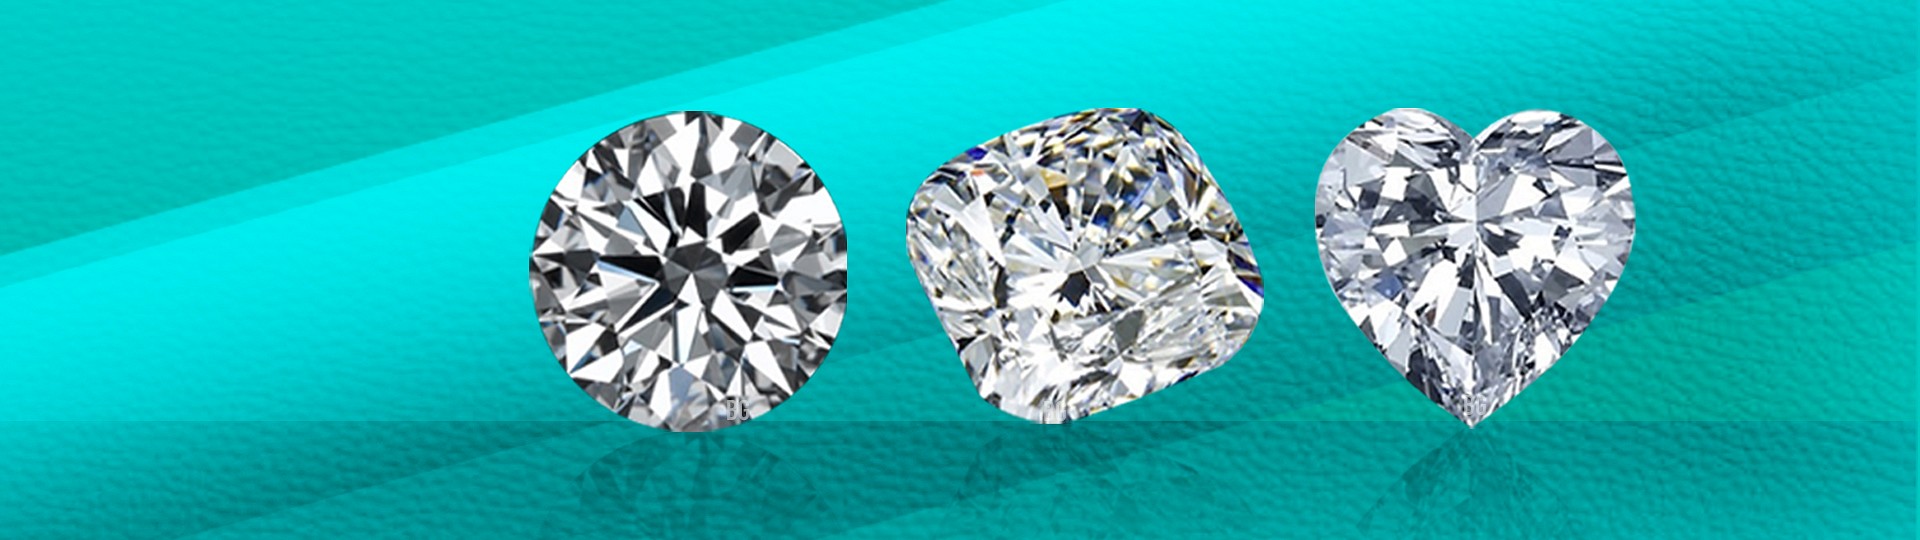 Sustainability Crafted Natural GIA Diamonds | Day 1 by Bid Global International Auctioneers LLC